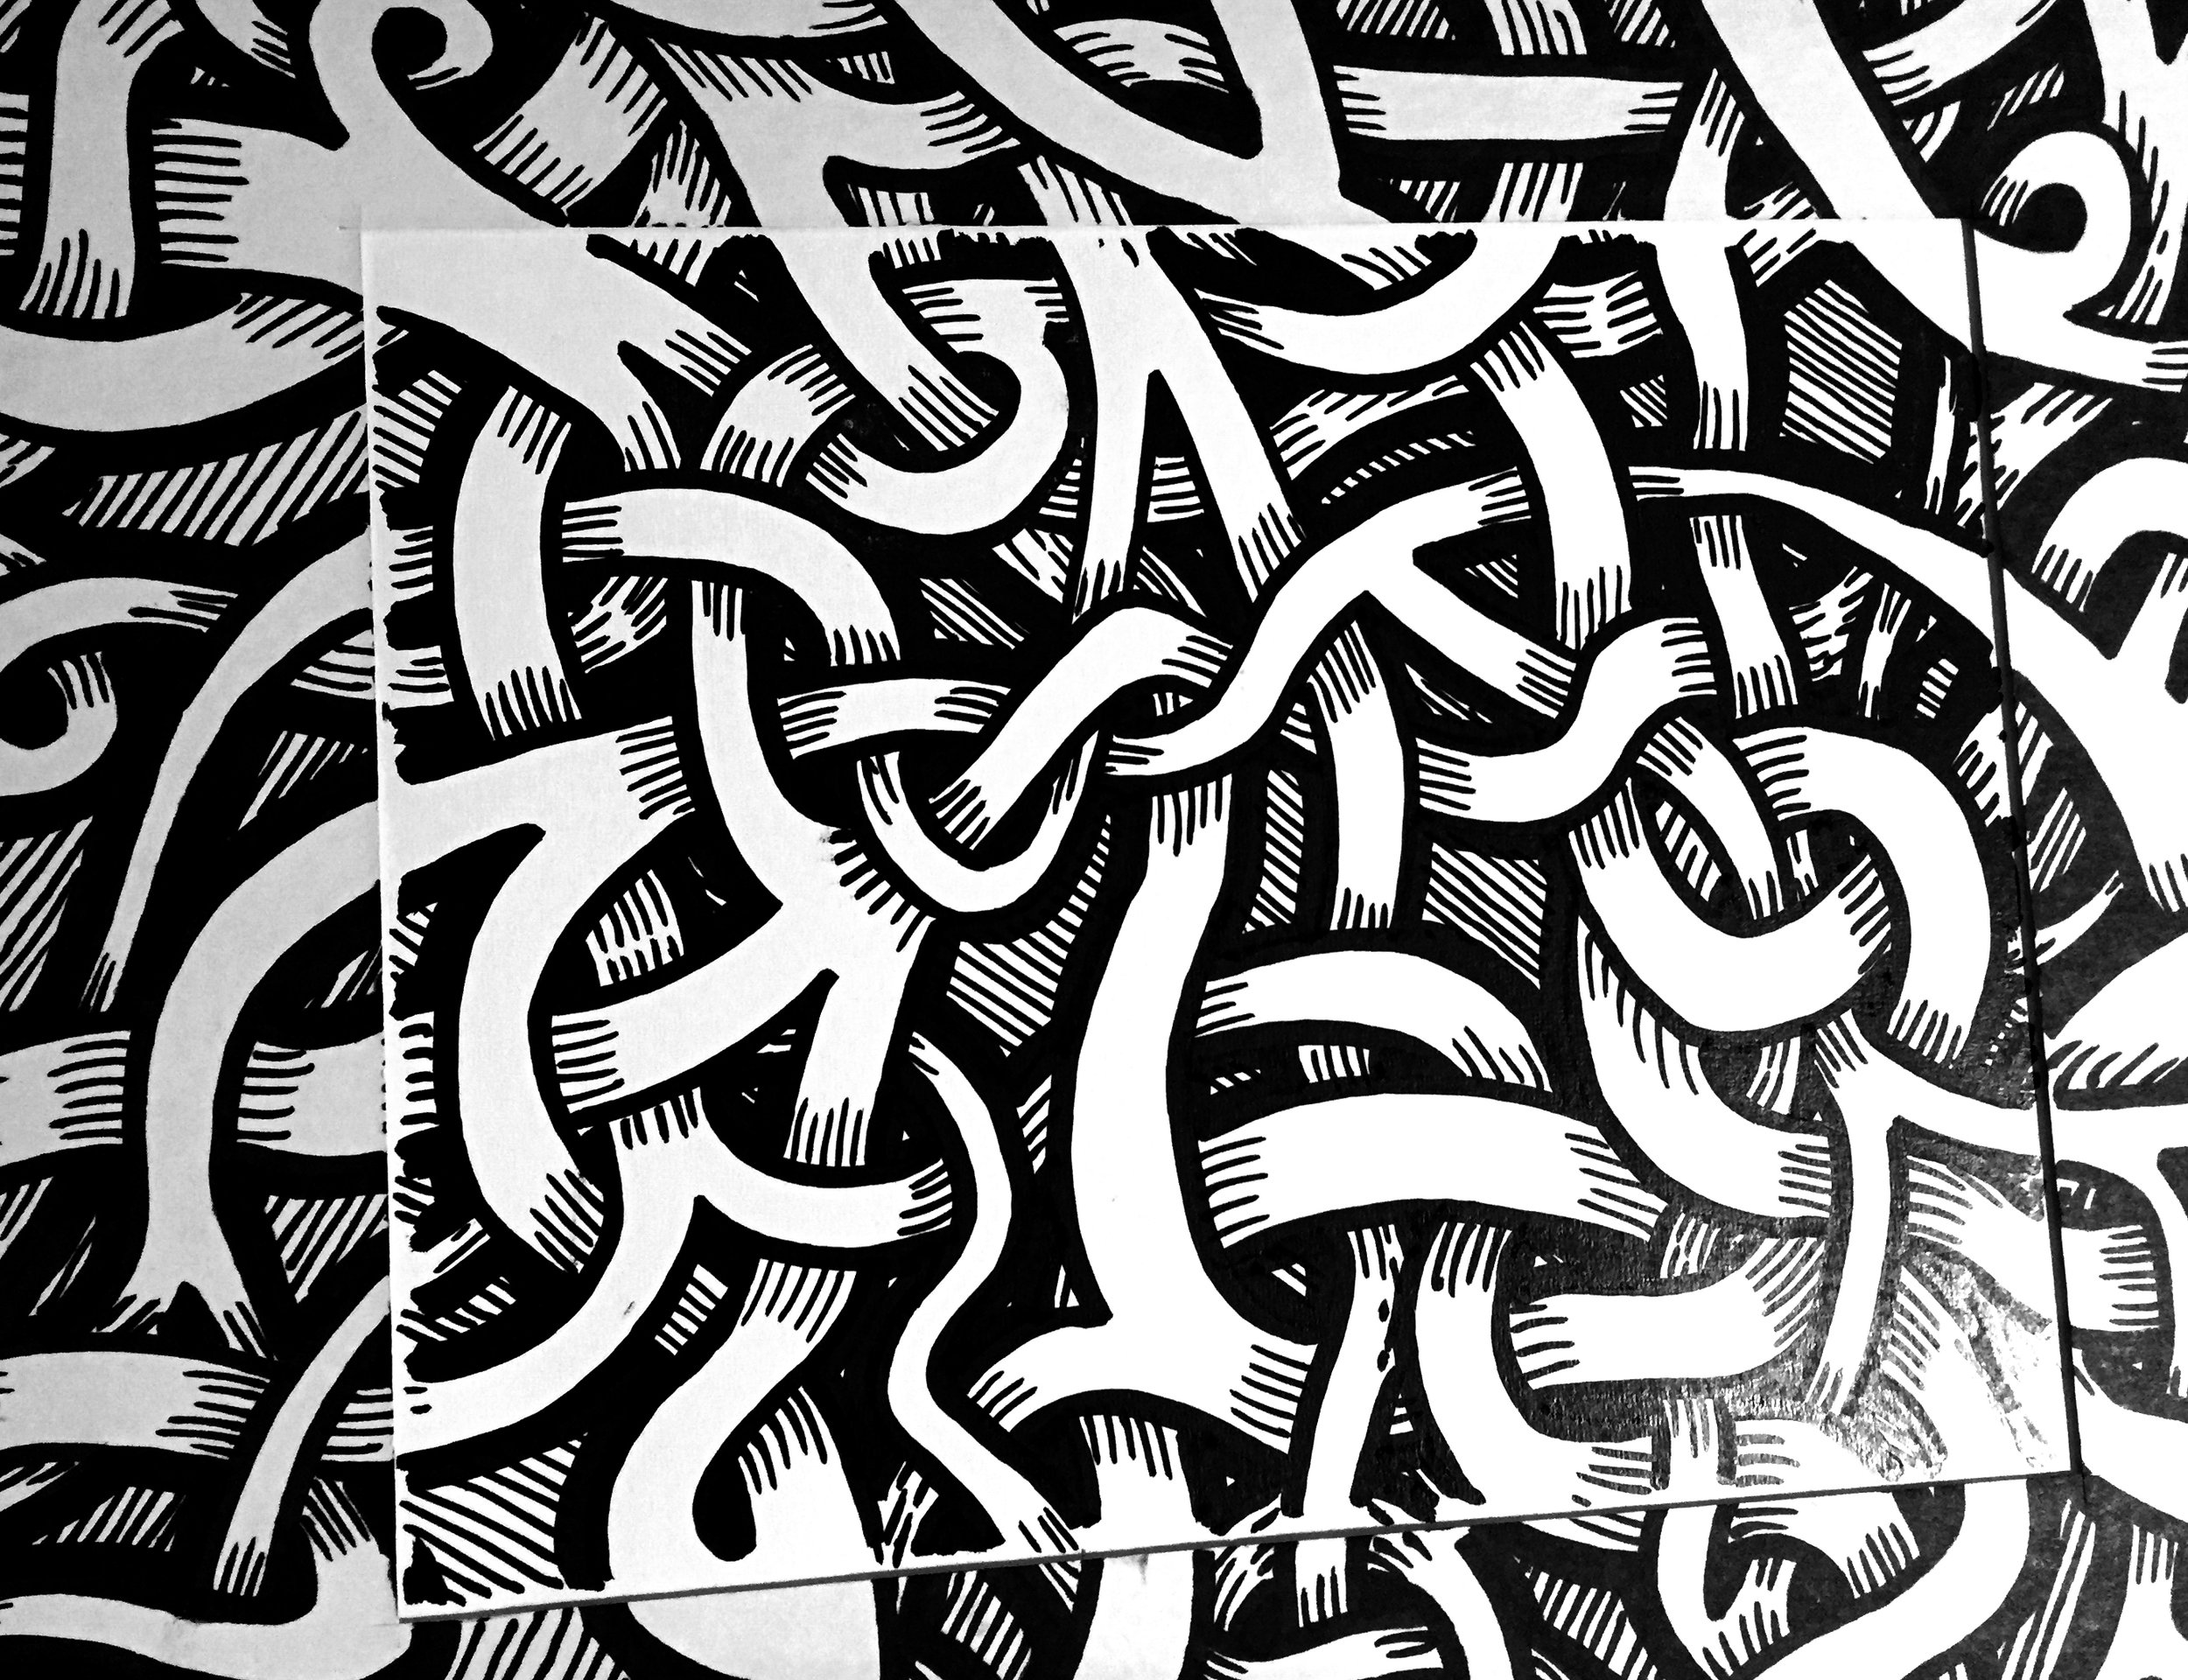   Old Knotwork 1  ink on paper. 2013    owned by Private Collector   